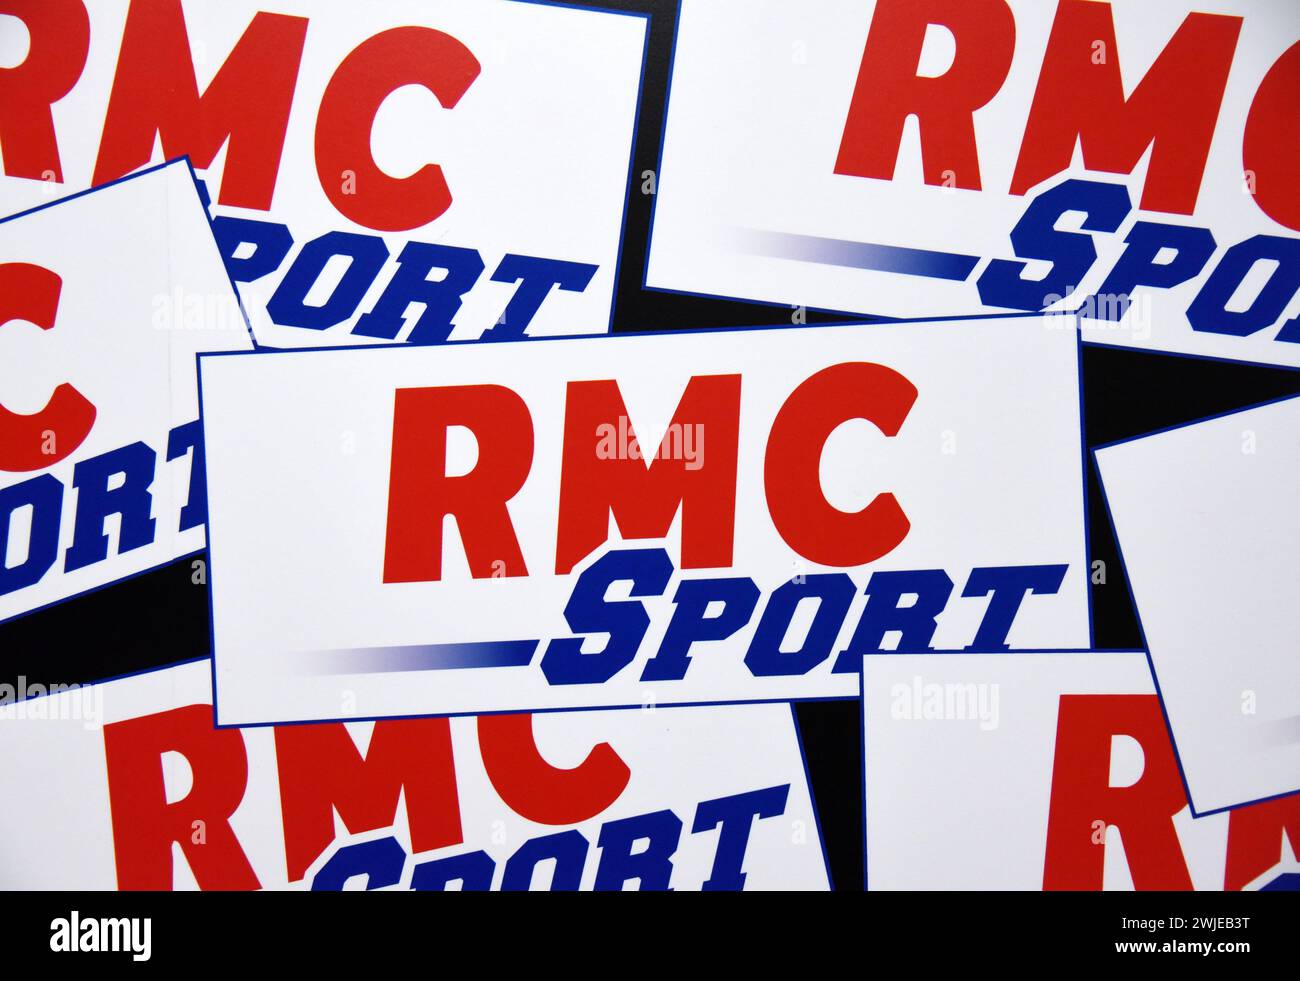 Logos of the TV channel RMC Sport Stock Photo